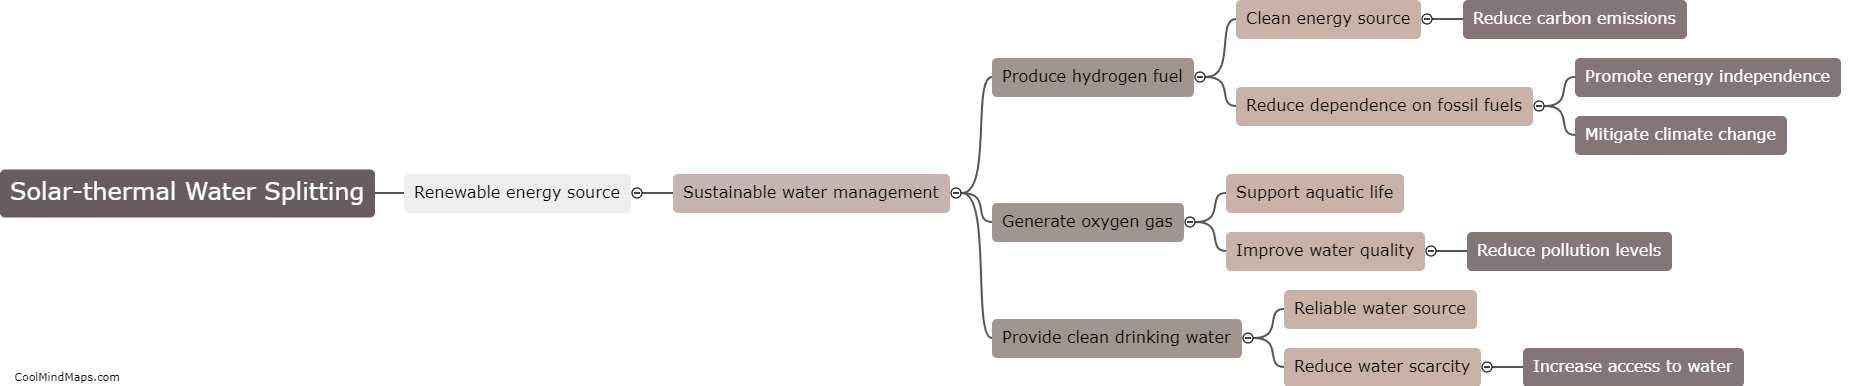 What role does solar-thermal water splitting play in sustainable water management?